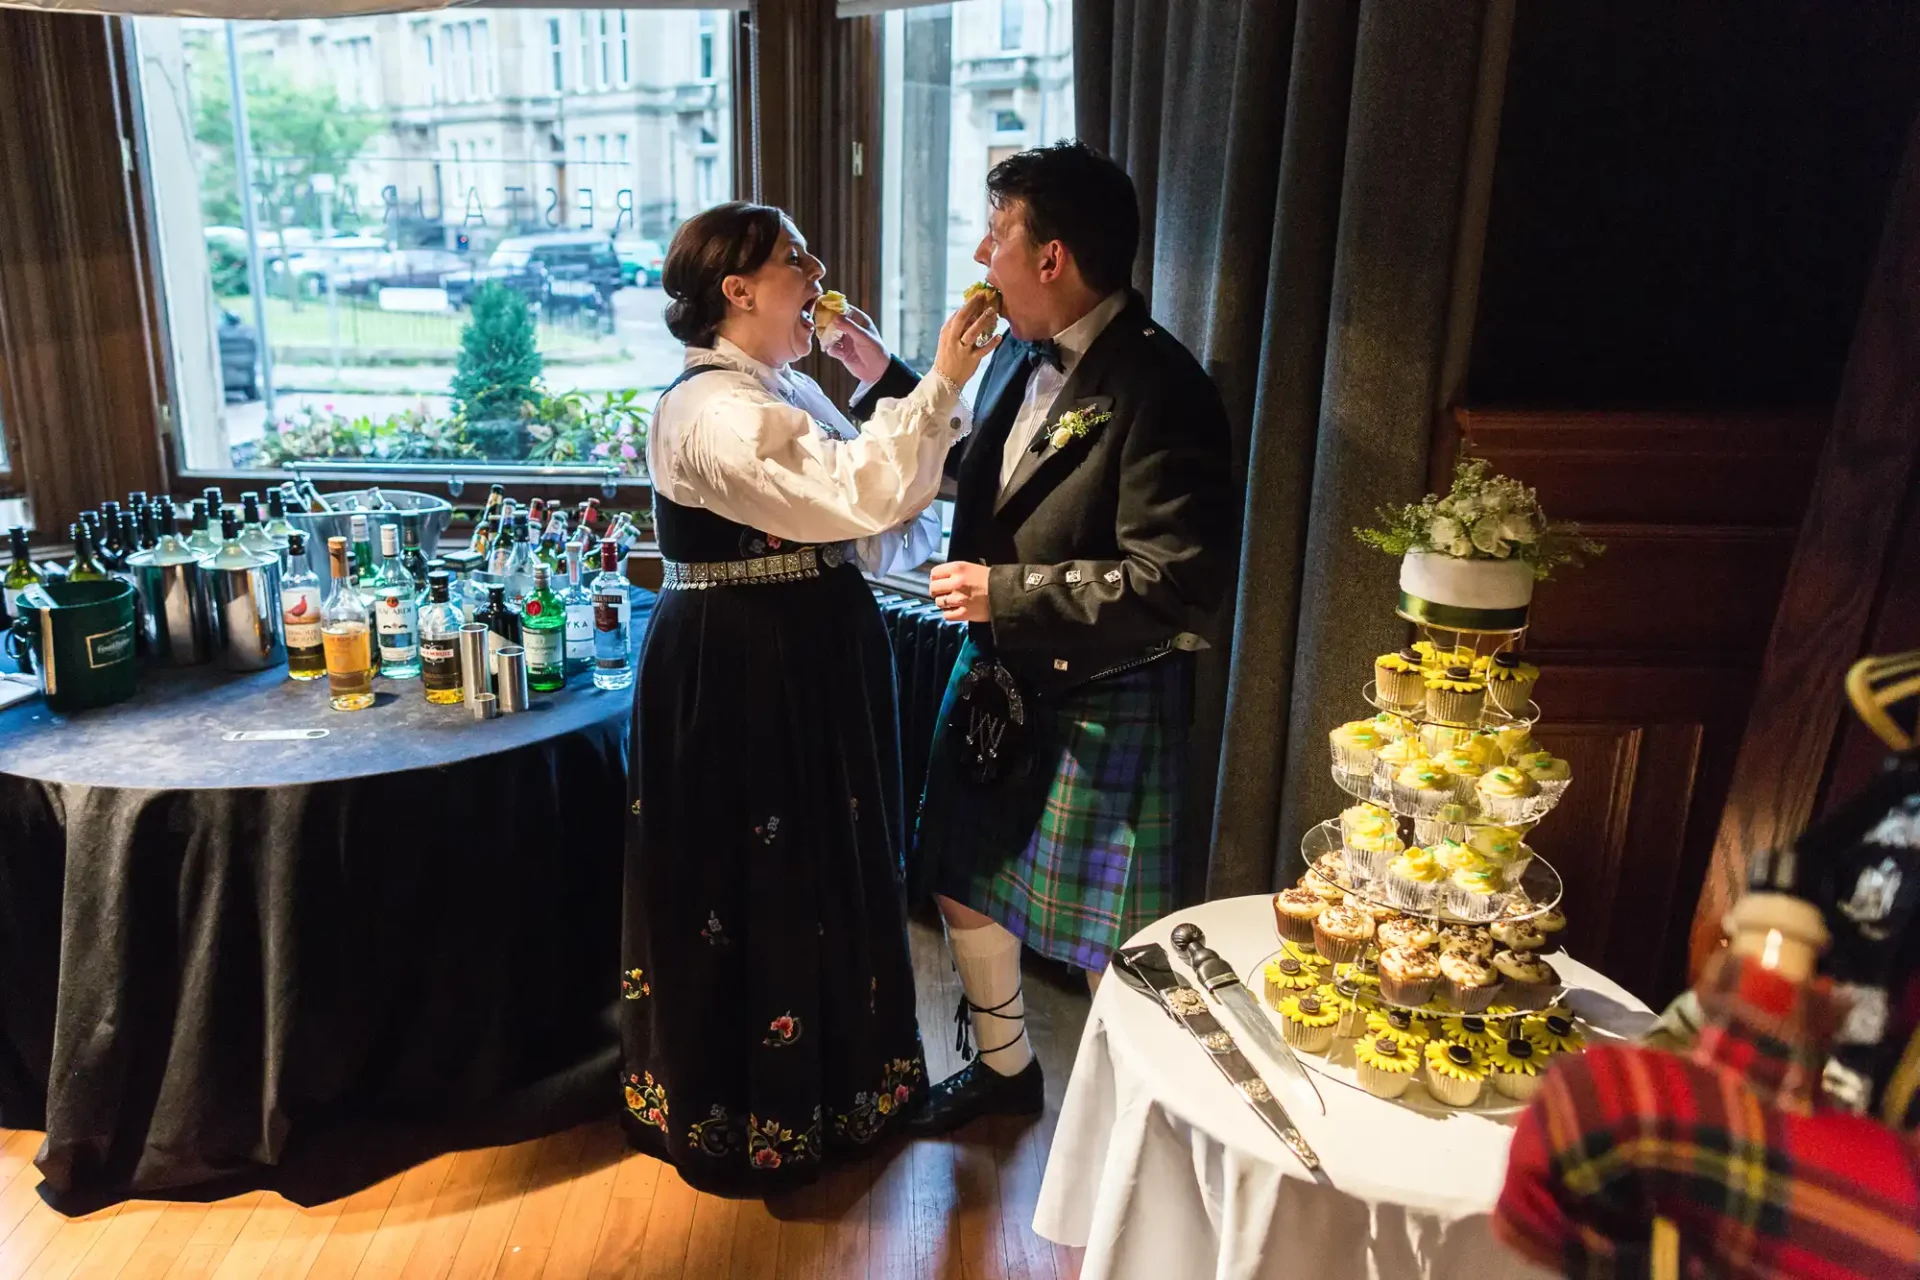 A couple in traditional scottish attire share an intimate moment at an indoor event, surrounded by a buffet and drinks table, with a tiered cupcake stand in the foreground.